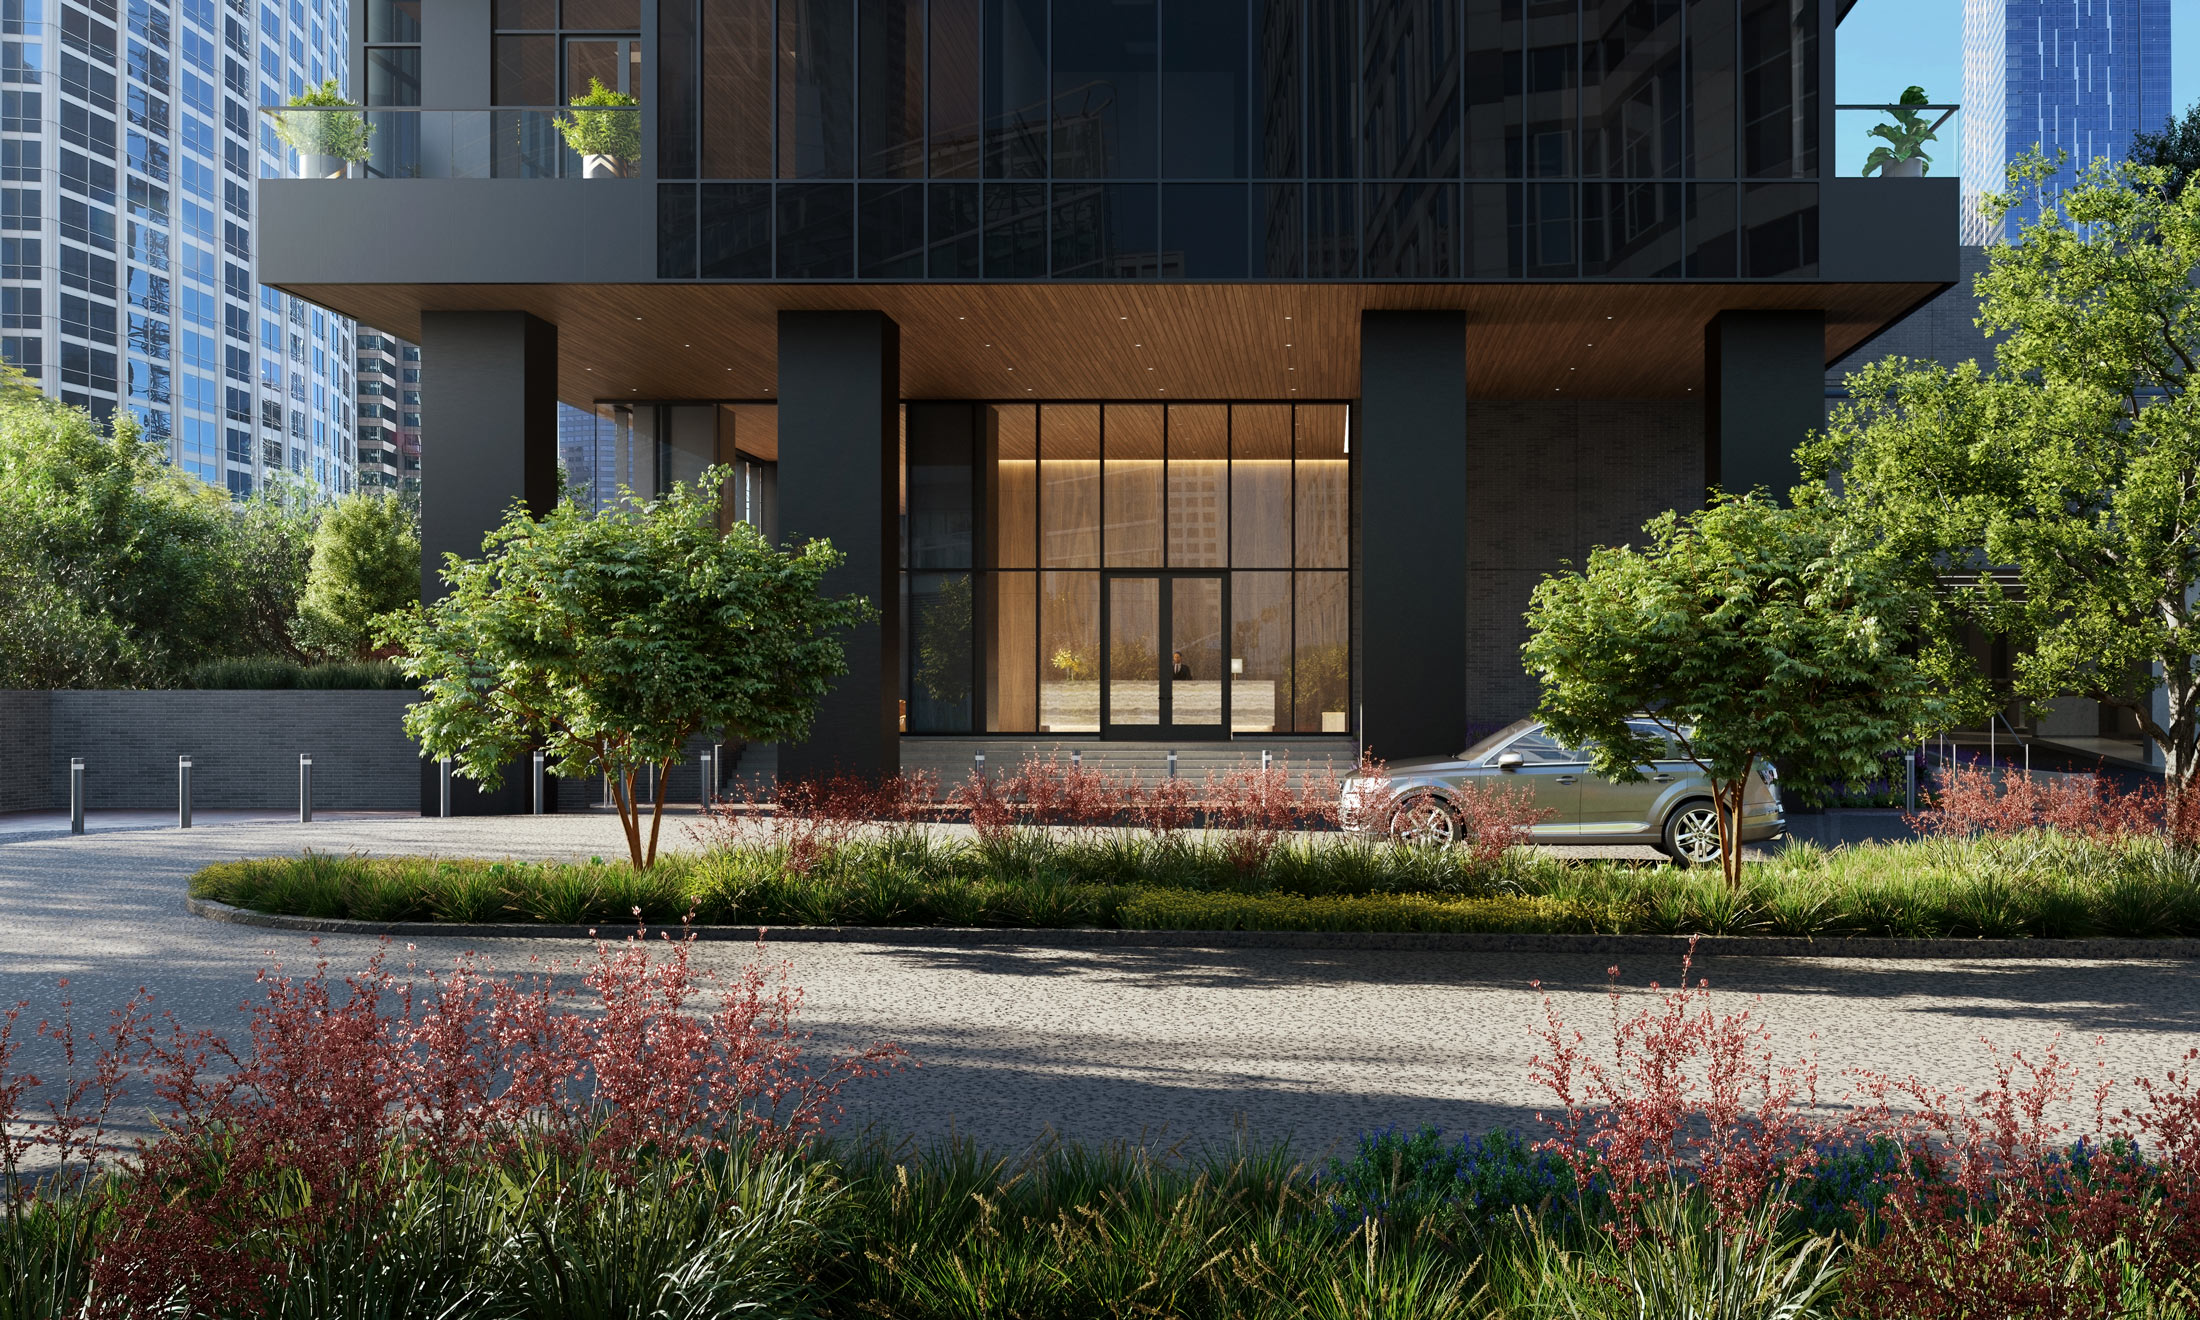 Architectural Rendering of the entrance of the 755 South Figueroa Street project located in Los Angeles, California